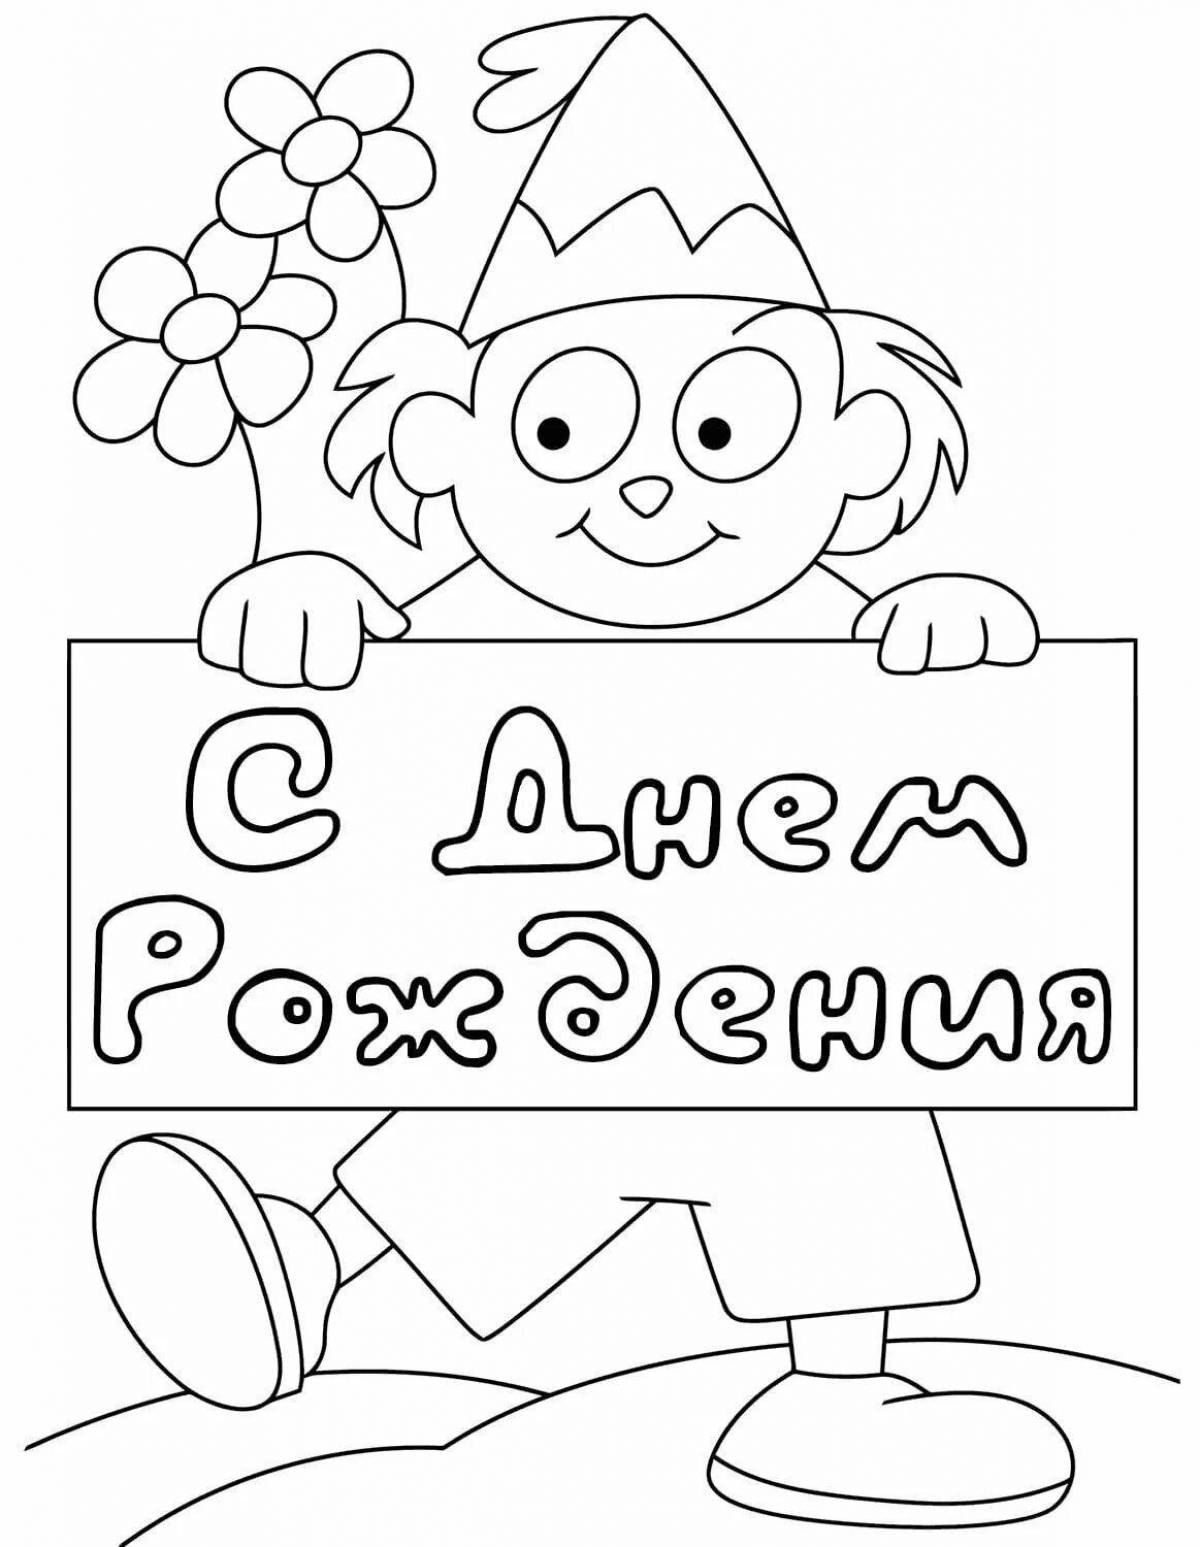 Coloring pages for dad happy birthday for kids